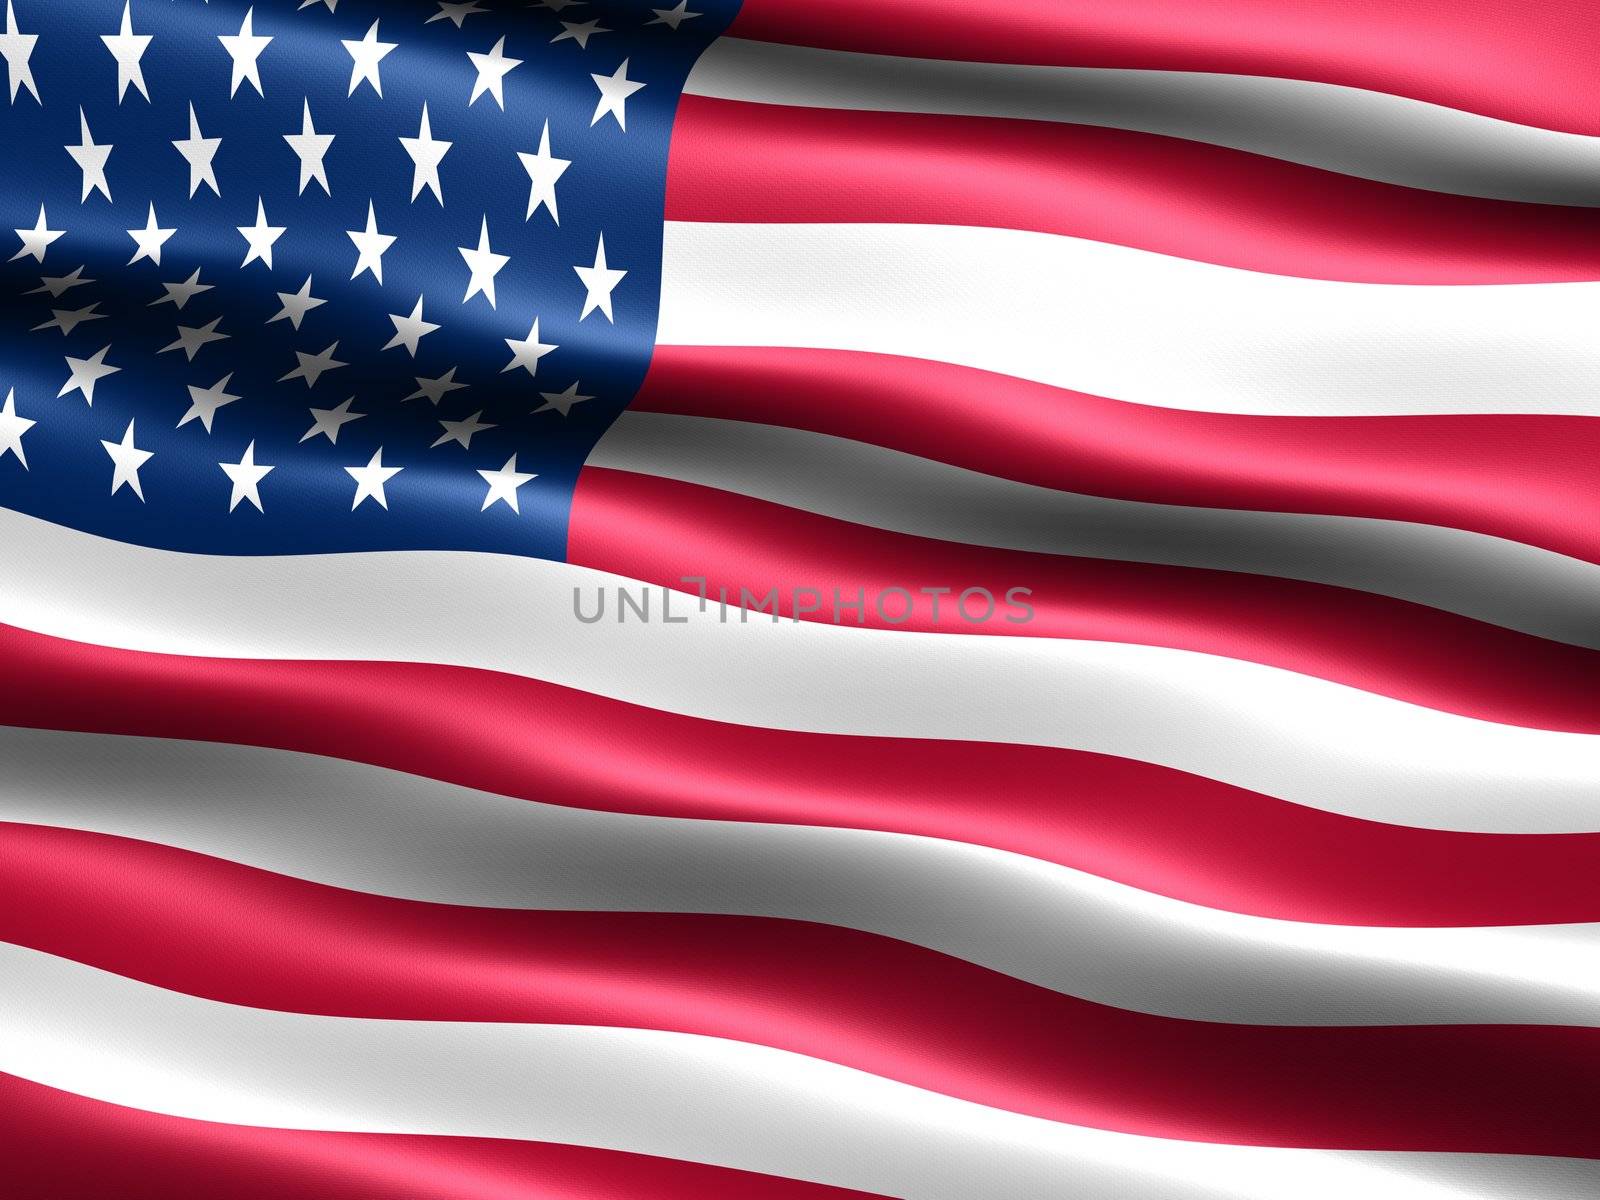 Computer generated illustration of the flag of the U.S.A. with silky appearance and waves